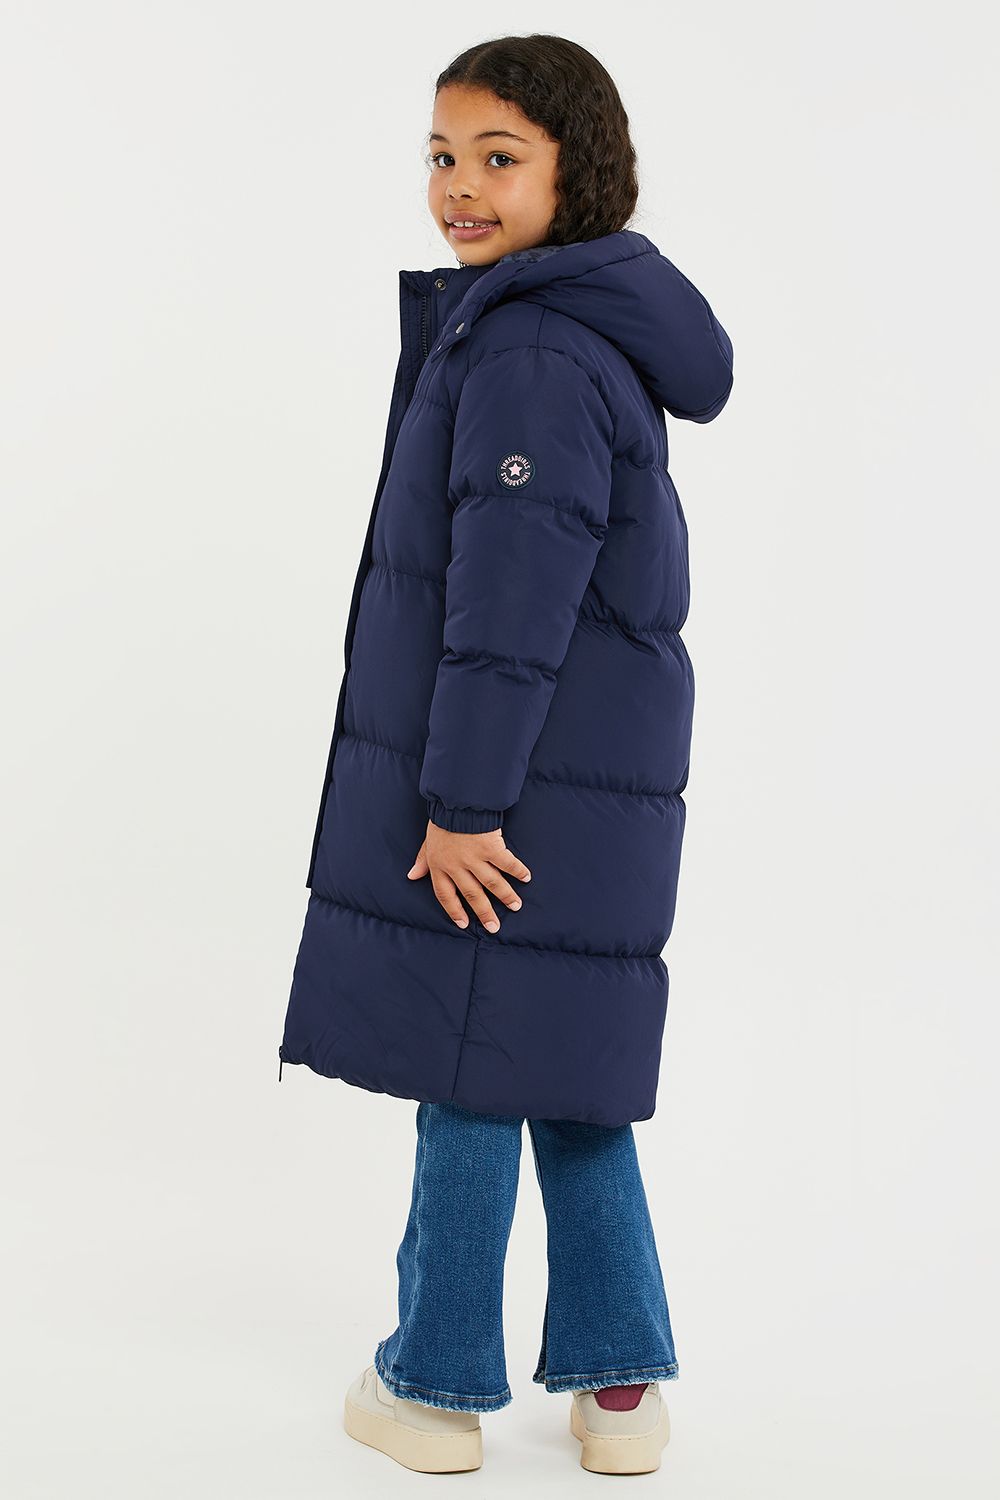 This longline hooded, padded jacket from Threadgirls features a two-way zip and popper fastenings. The jacket also has two side pockets, elasticated cuffs, and branded badge on the sleeve. Perfect for keeping warm this back-to-school season, other colours and styles are also available.